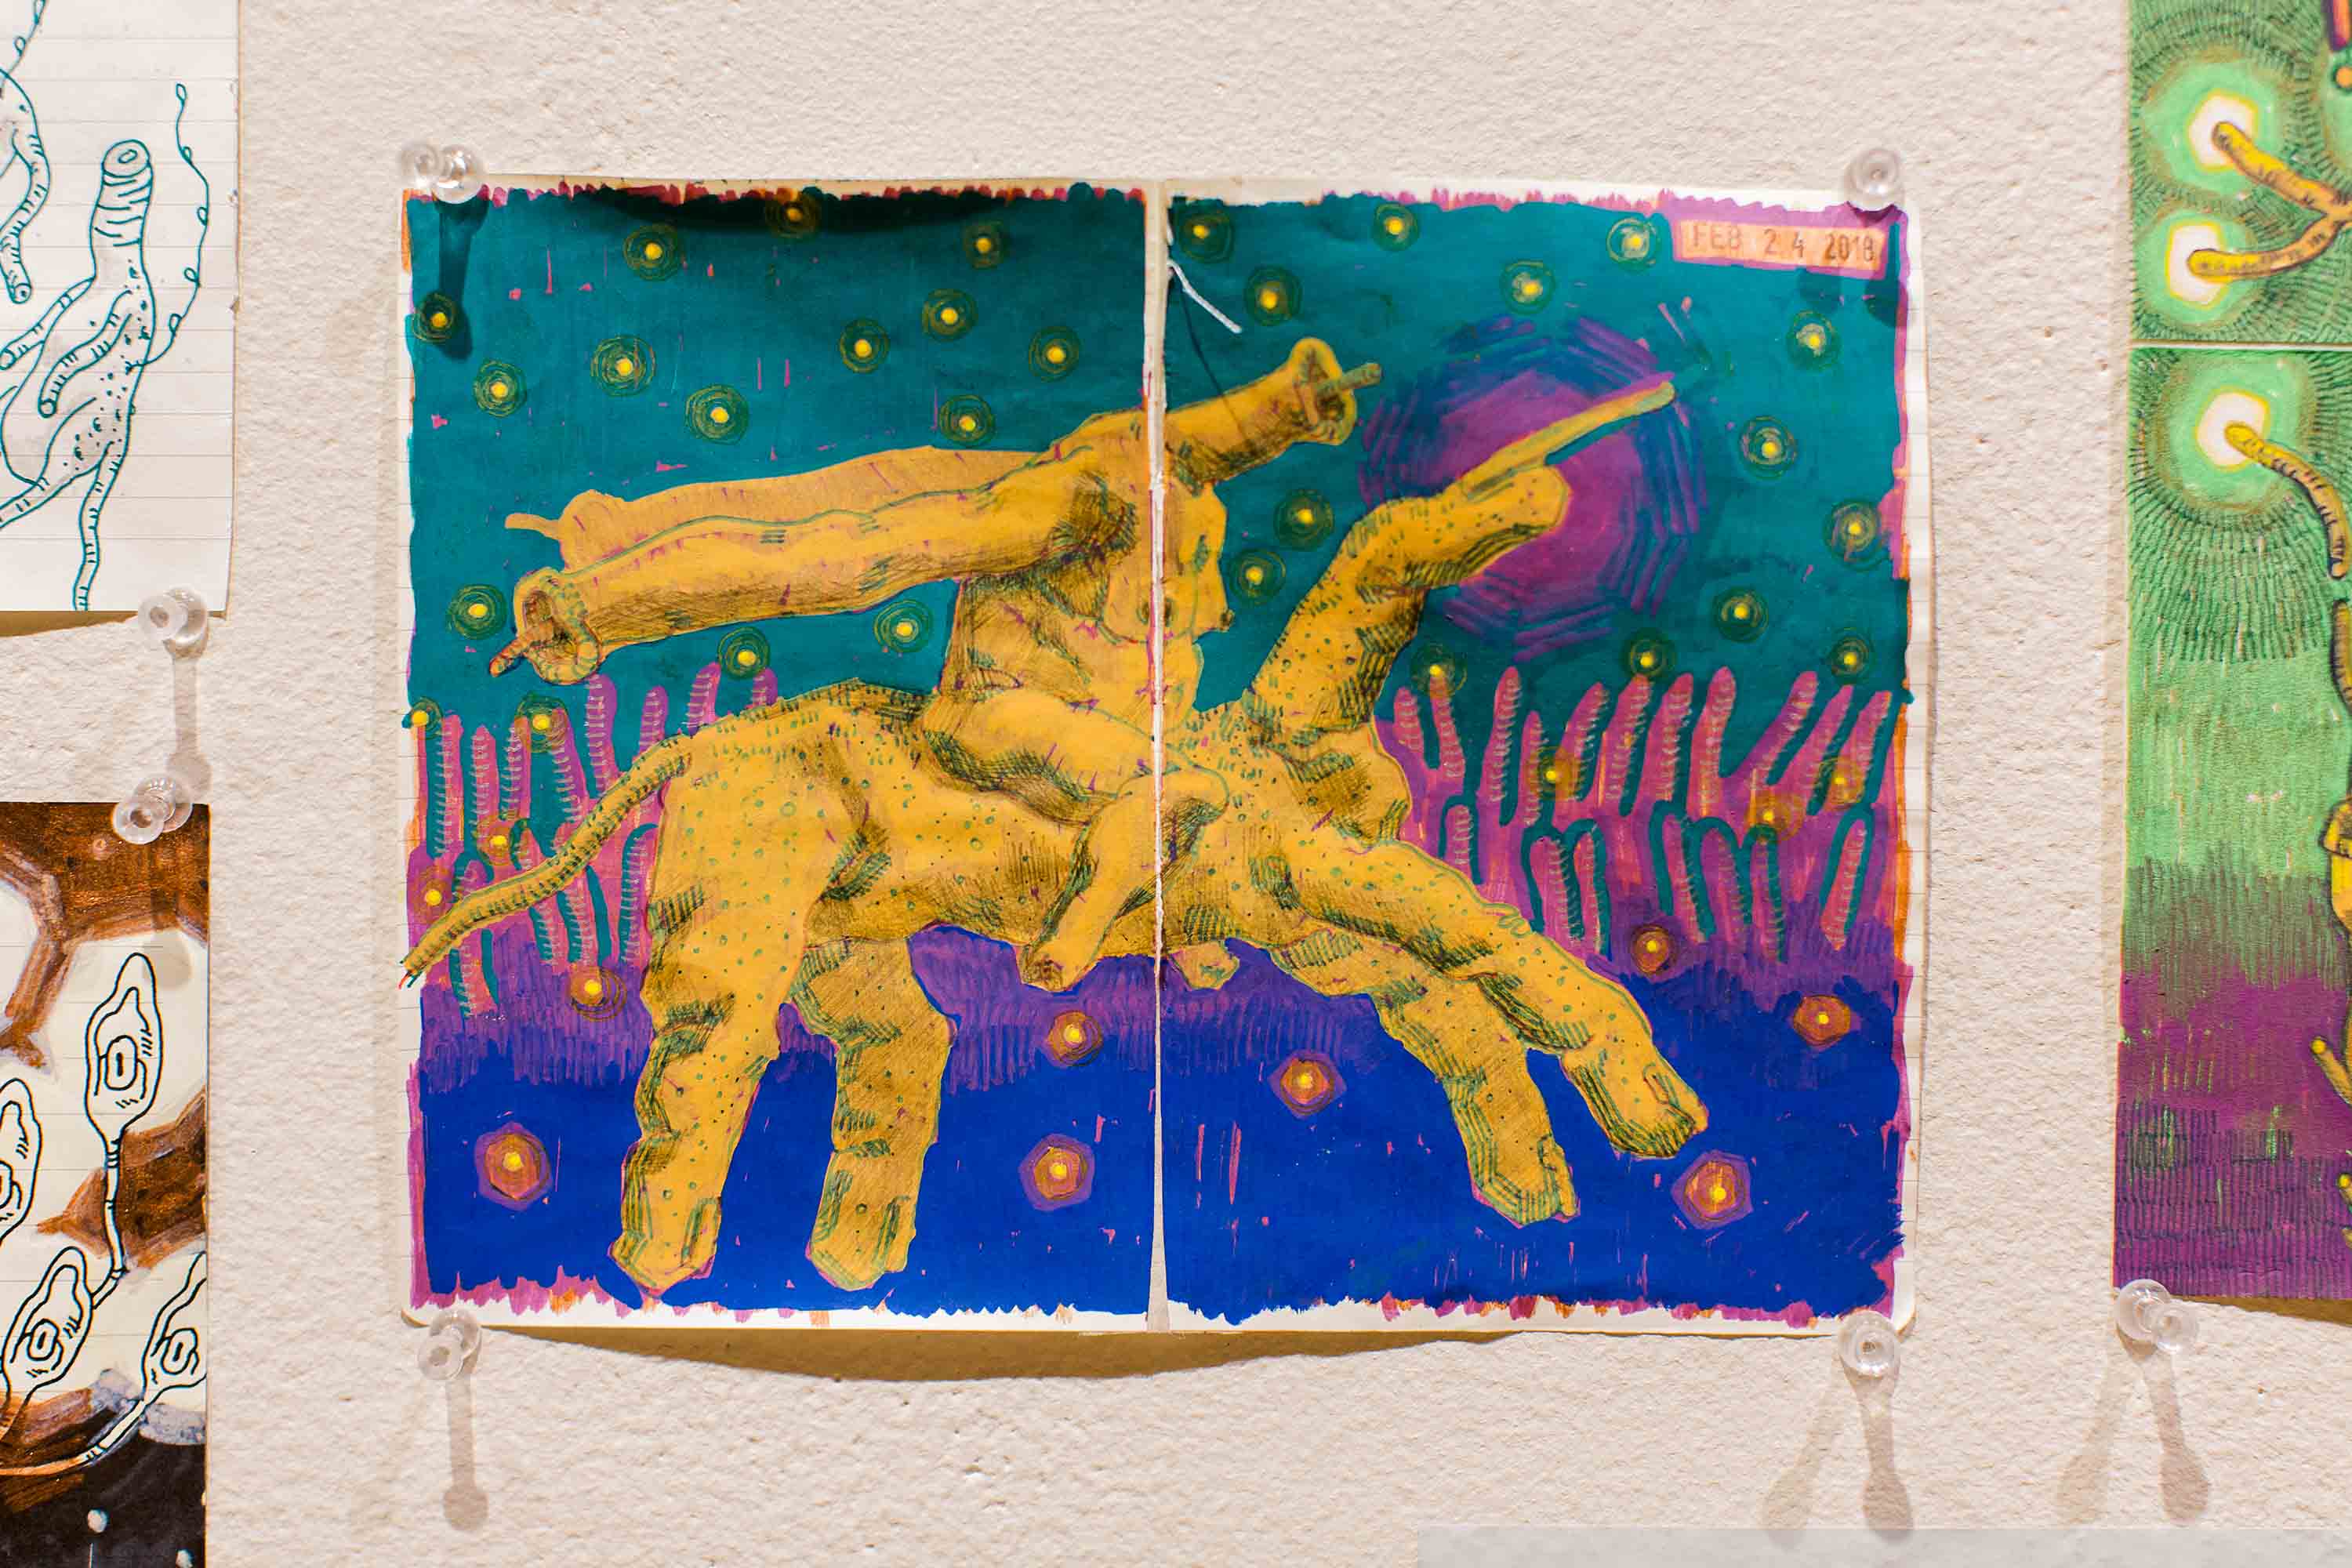 Painting of two yellow monsters against a starry background.